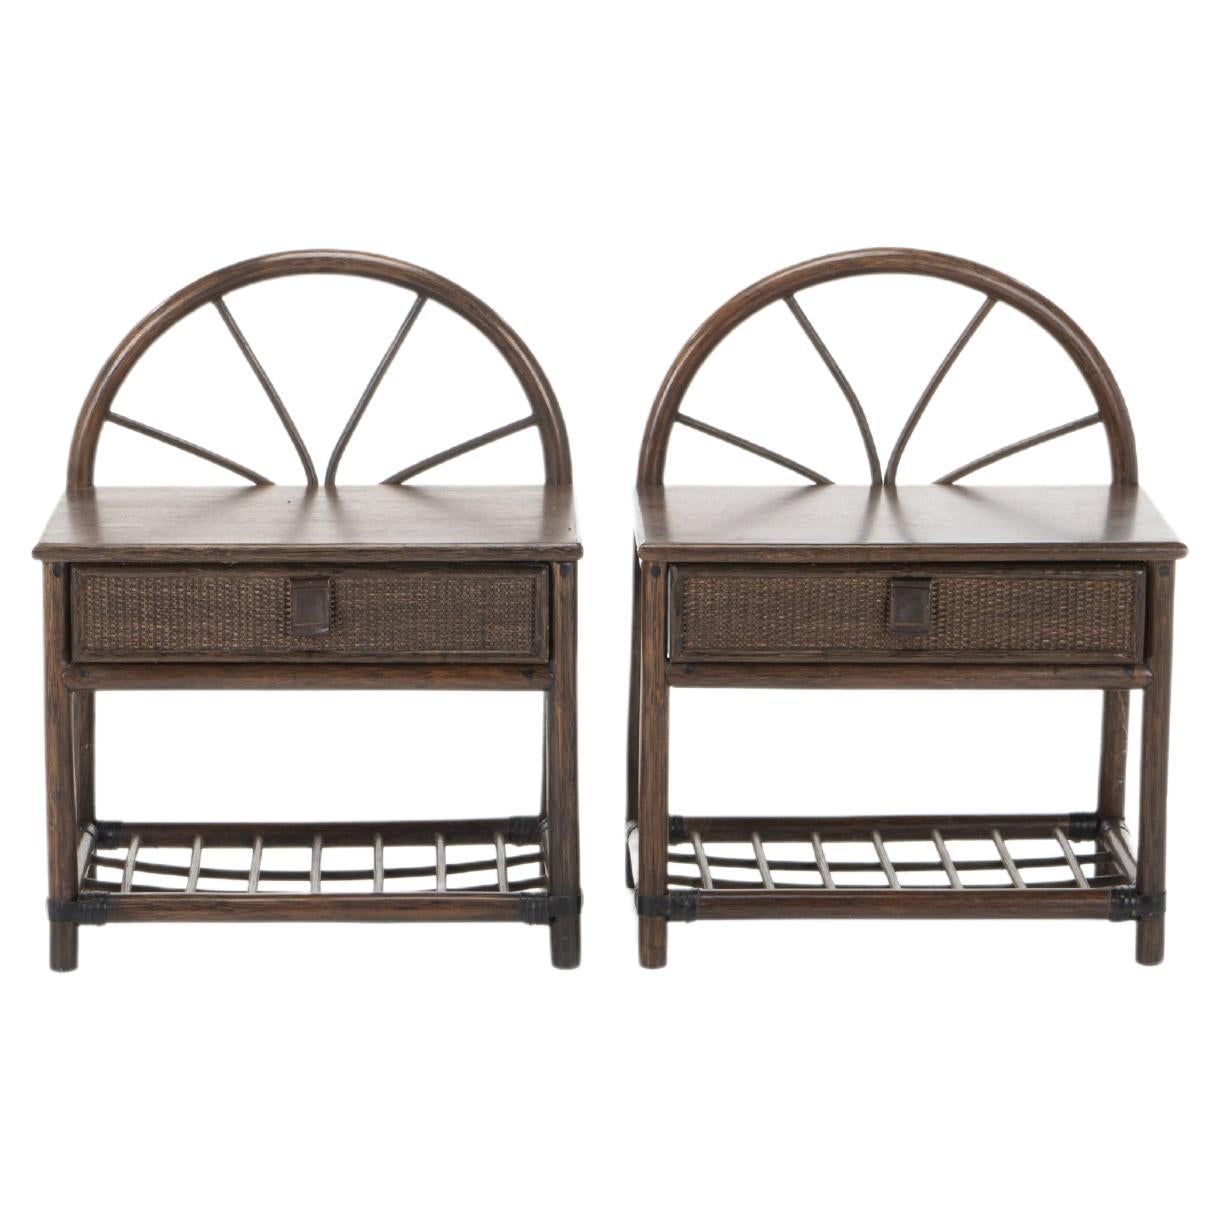 Set of 2 Bedside Tables in Bamboo and Rattan, 1970s For Sale